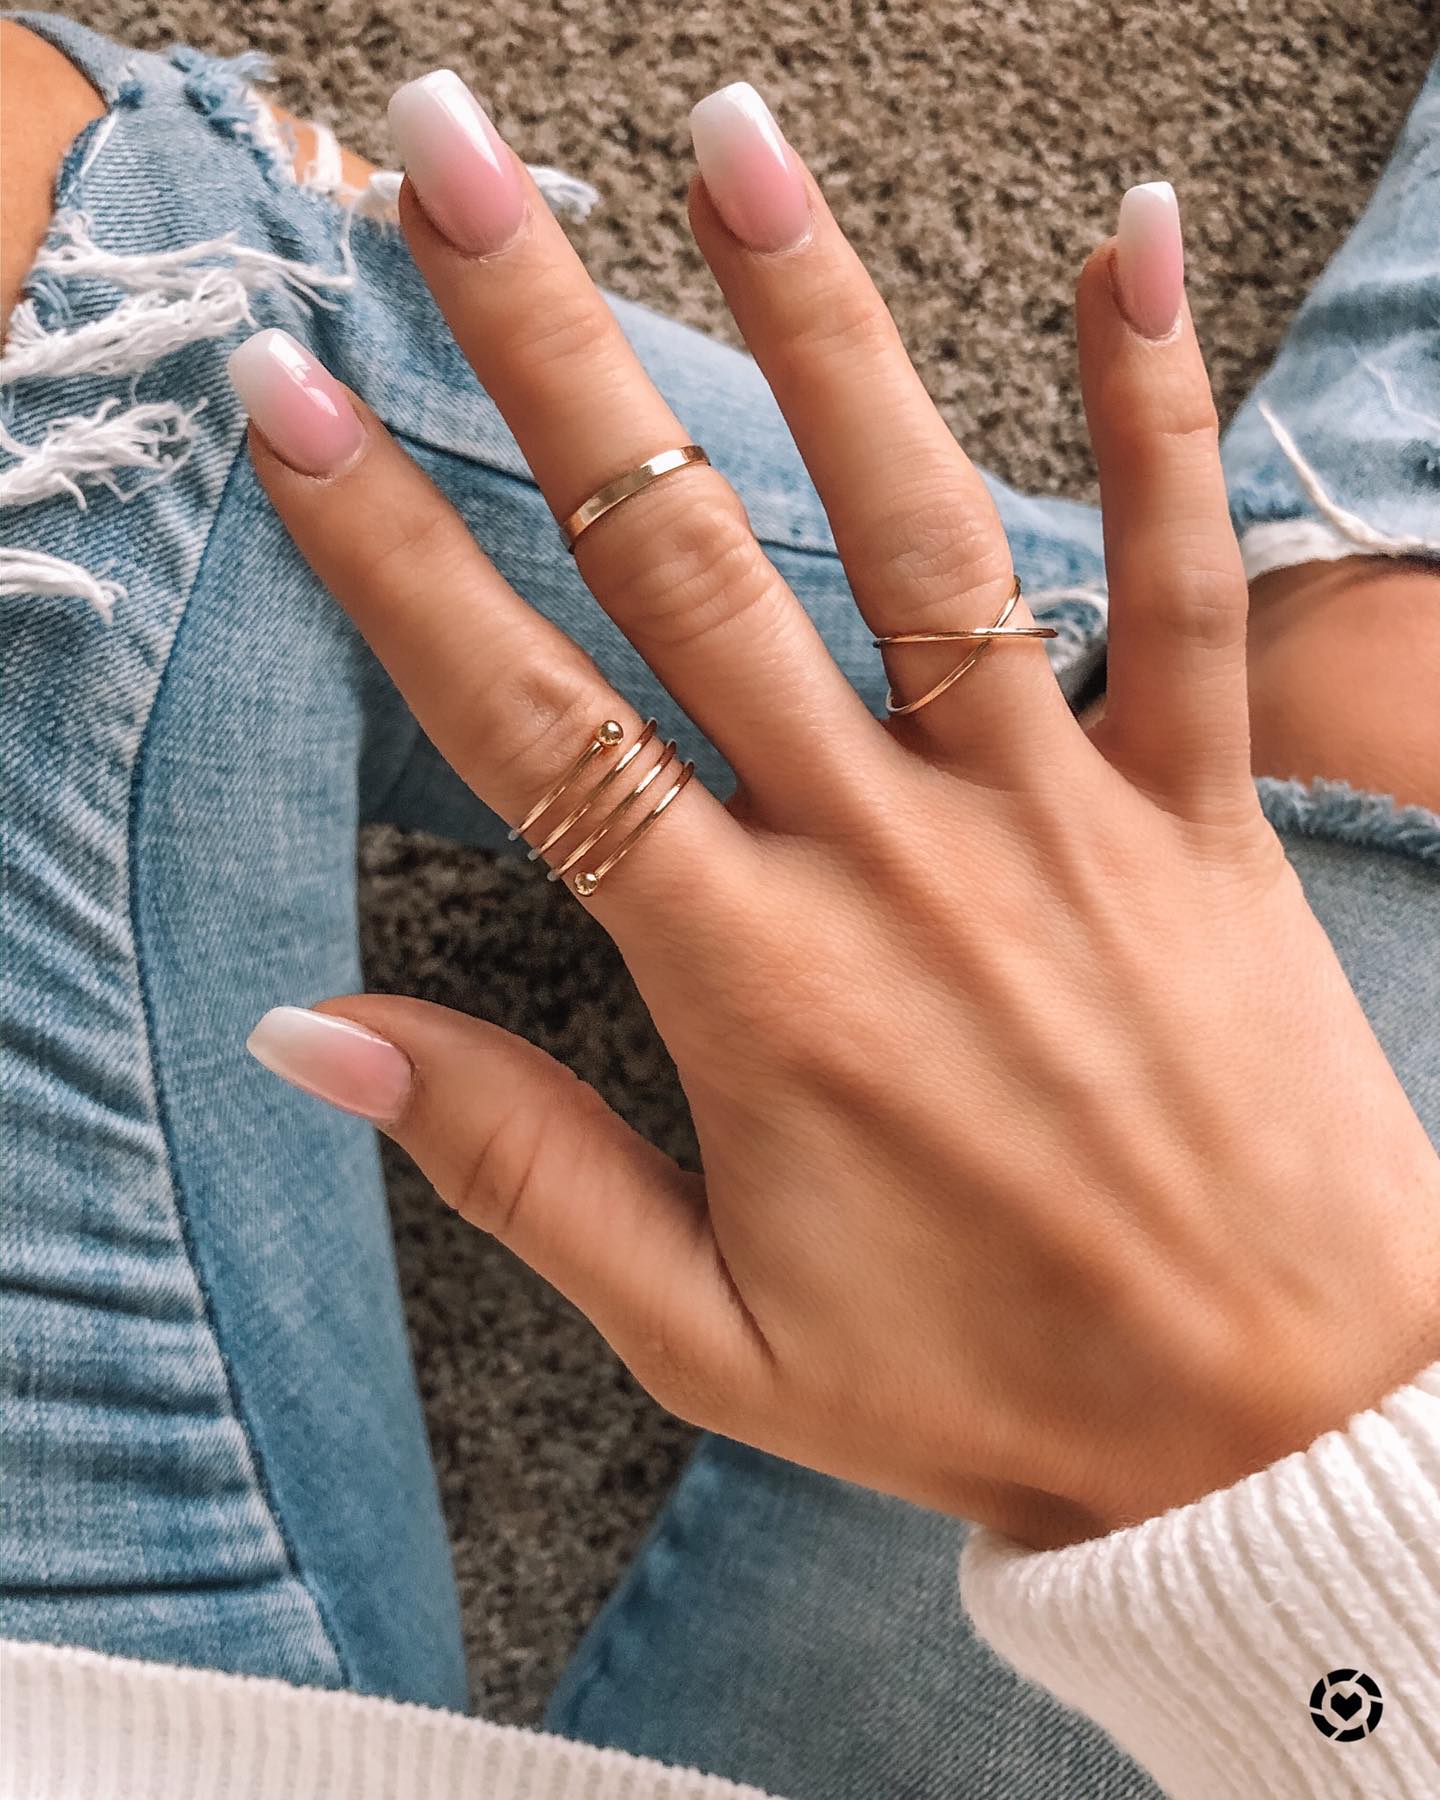 If you like the nail designs that look so natural, then this pink and white ombre nails are definitely for you. They will look chic whatever you wear. All colors are matching with these nails, so you should go for it.